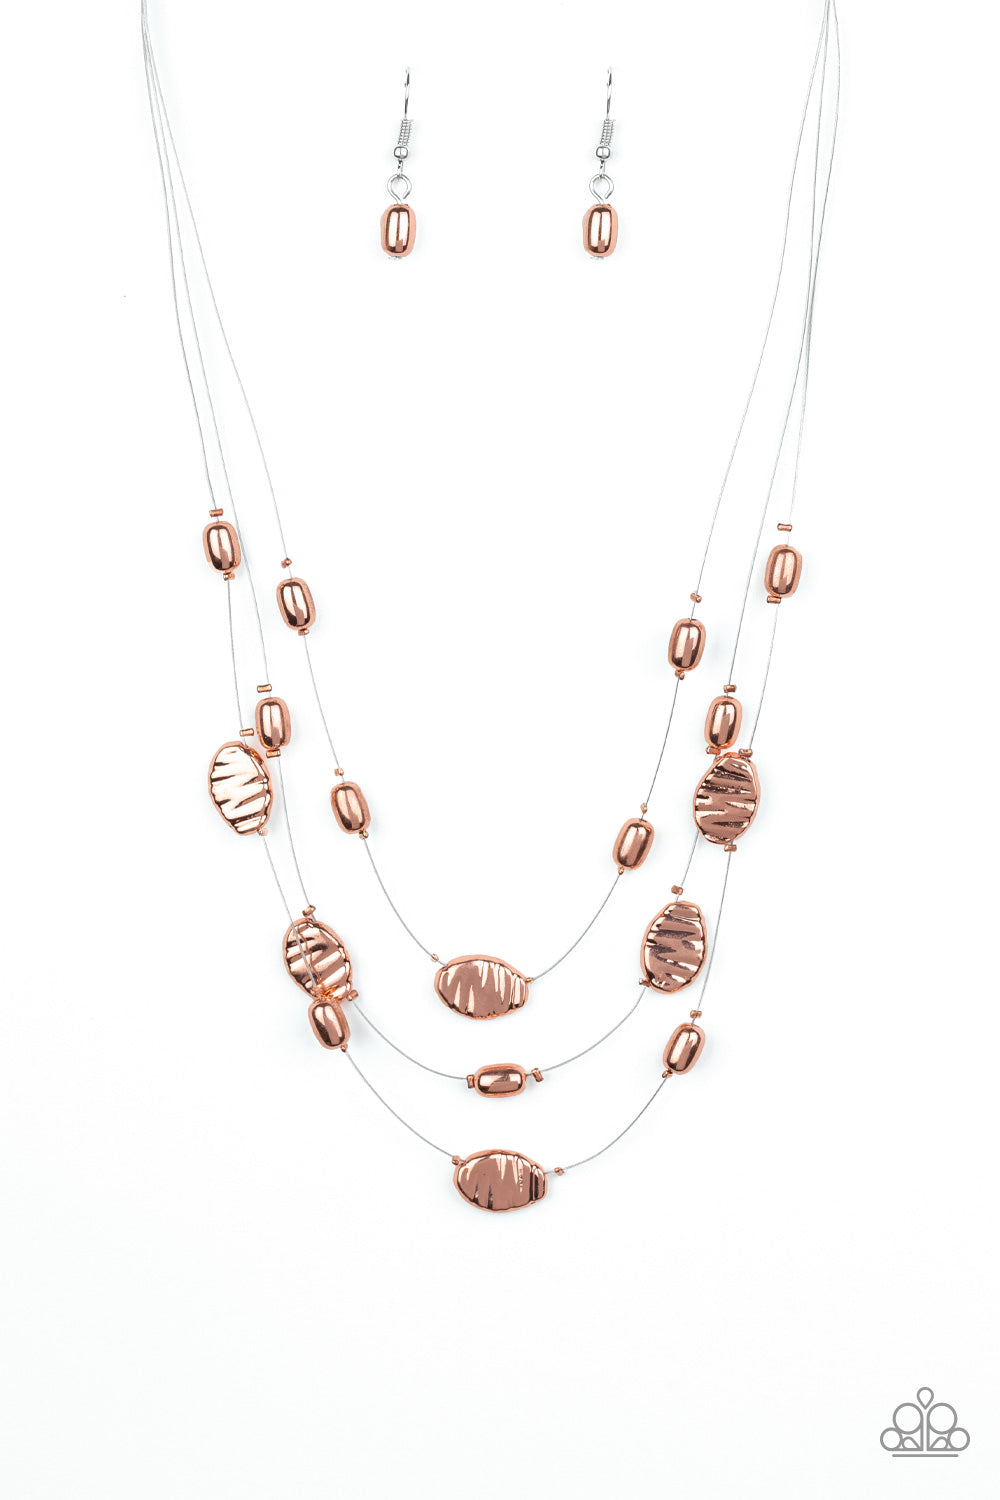 Featuring smooth and delicately hammered finishes, mismatched shiny copper beads are threaded along dainty silver wire, creating floating layers below the collar. Features an adjustable clasp closure.